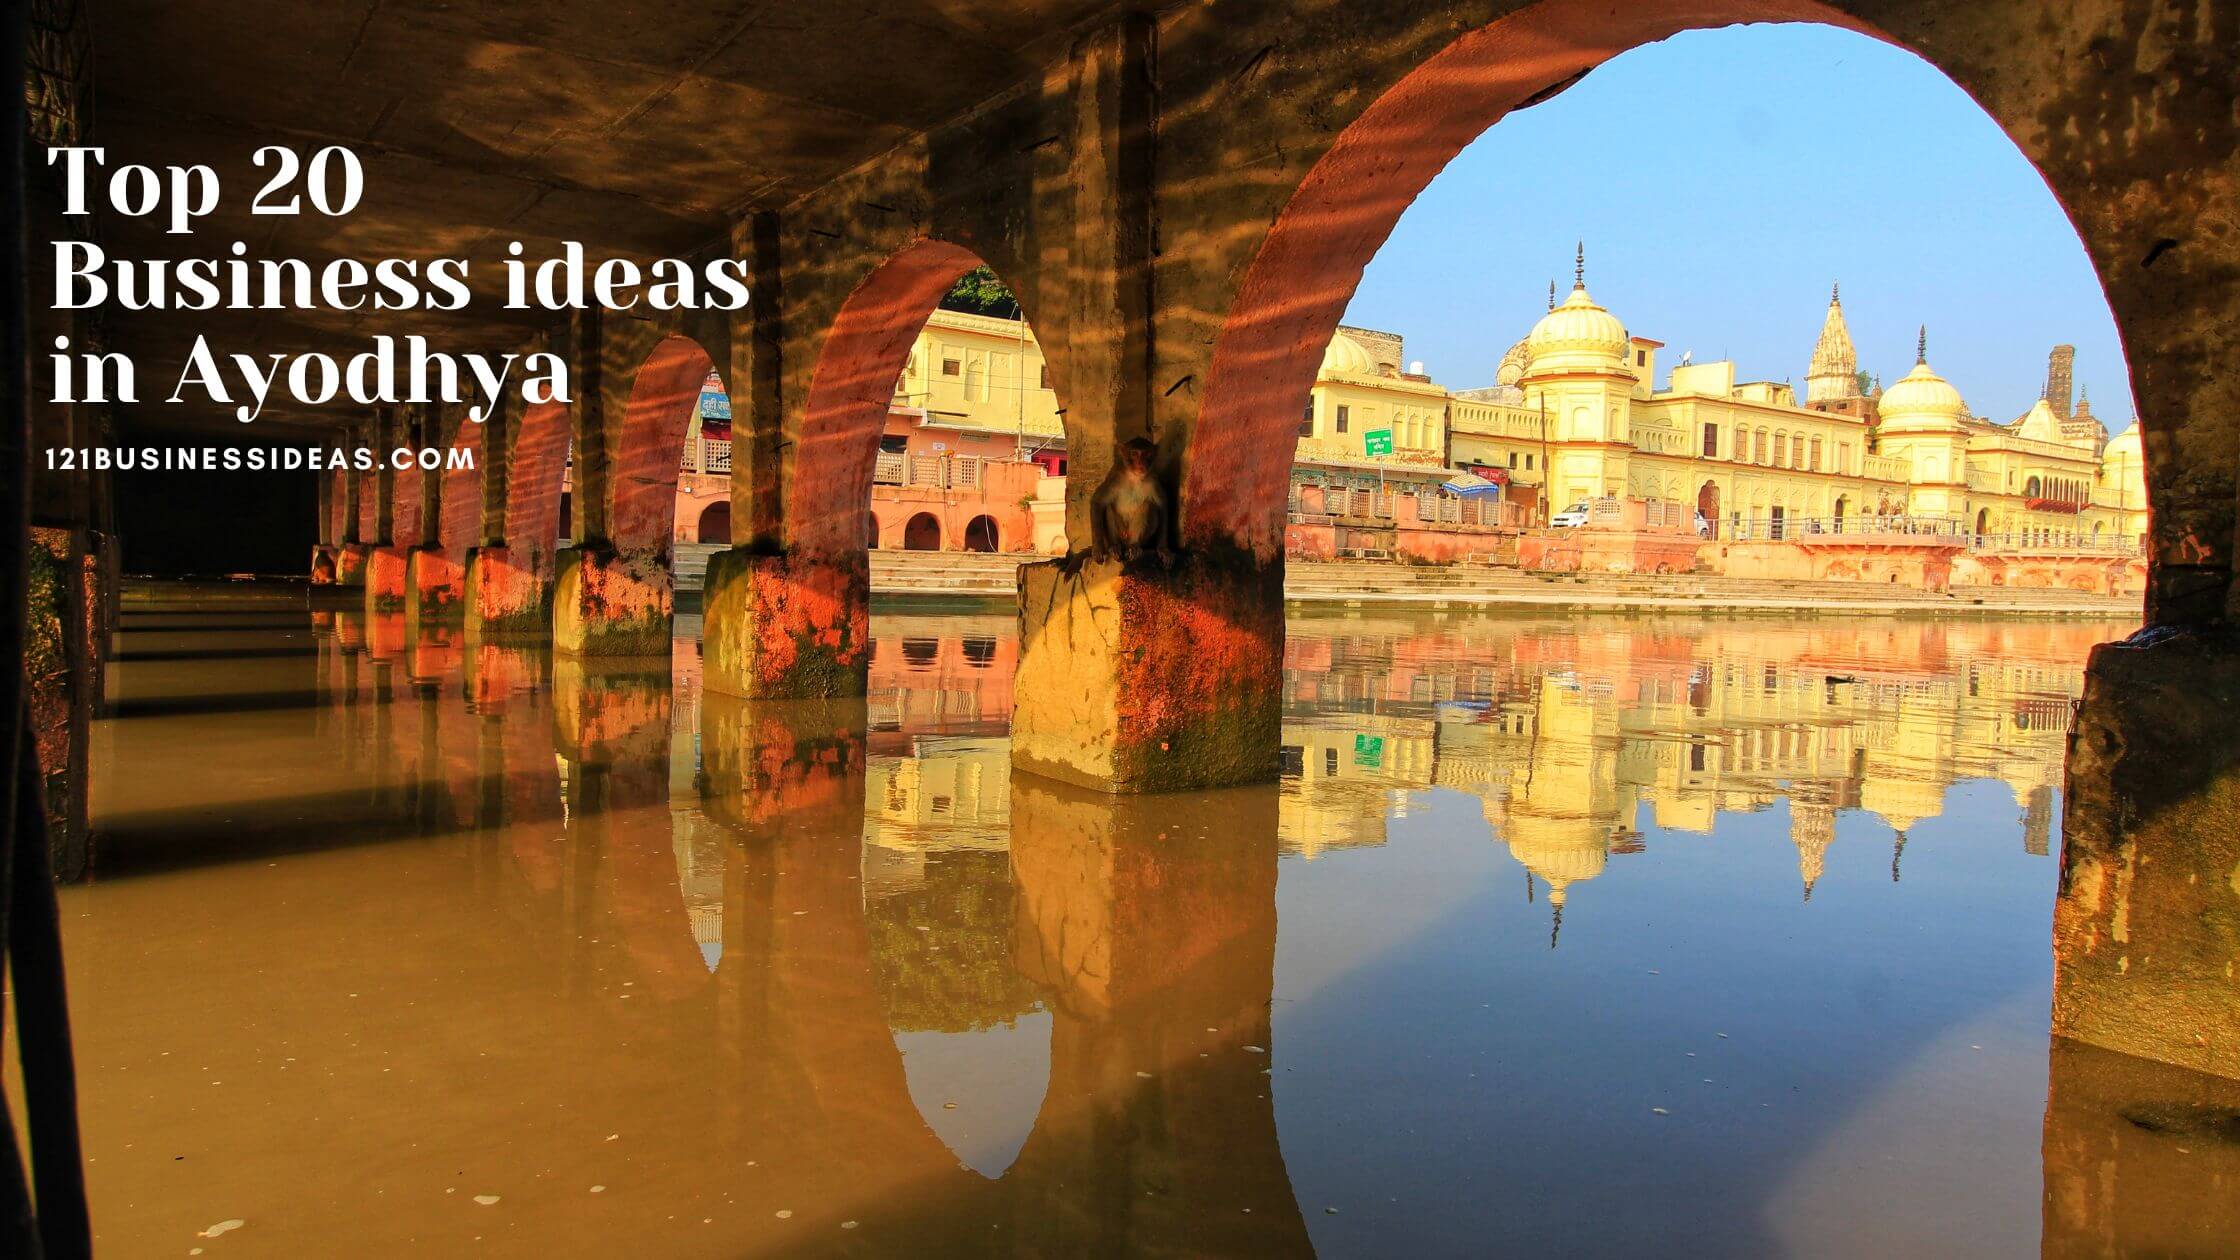 Top 20 Business ideas in Ayodhya (1)